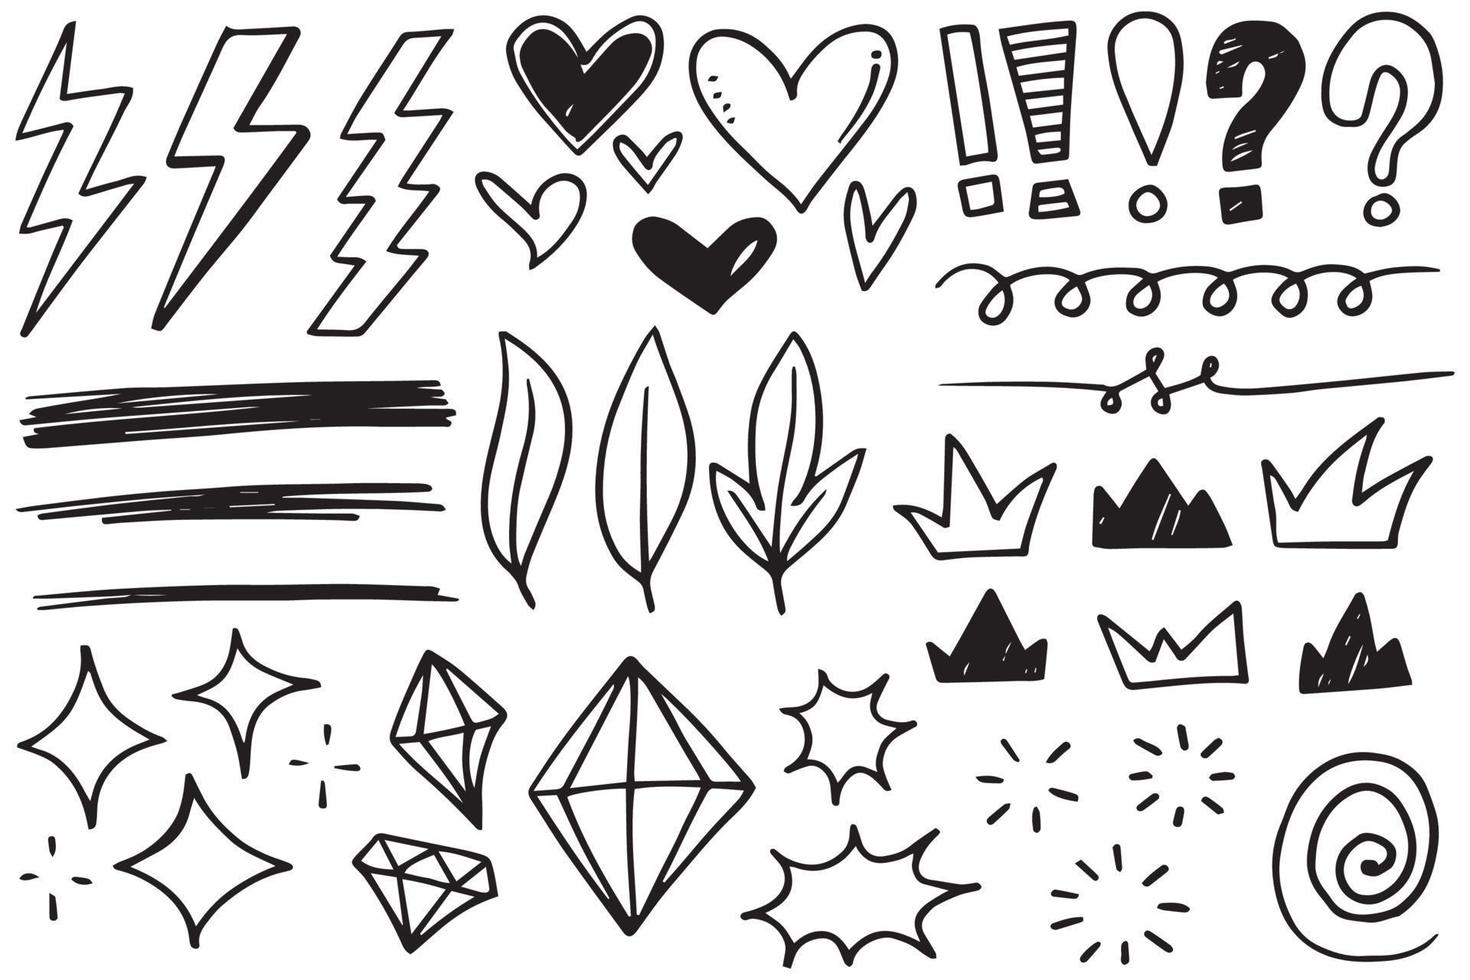 Doodle lines, arrows, circles, crowns, lightning, explosions, brushes, diamonds and vector curves. Hand drawn design elements isolated on a white background for infographics. vector illustration.